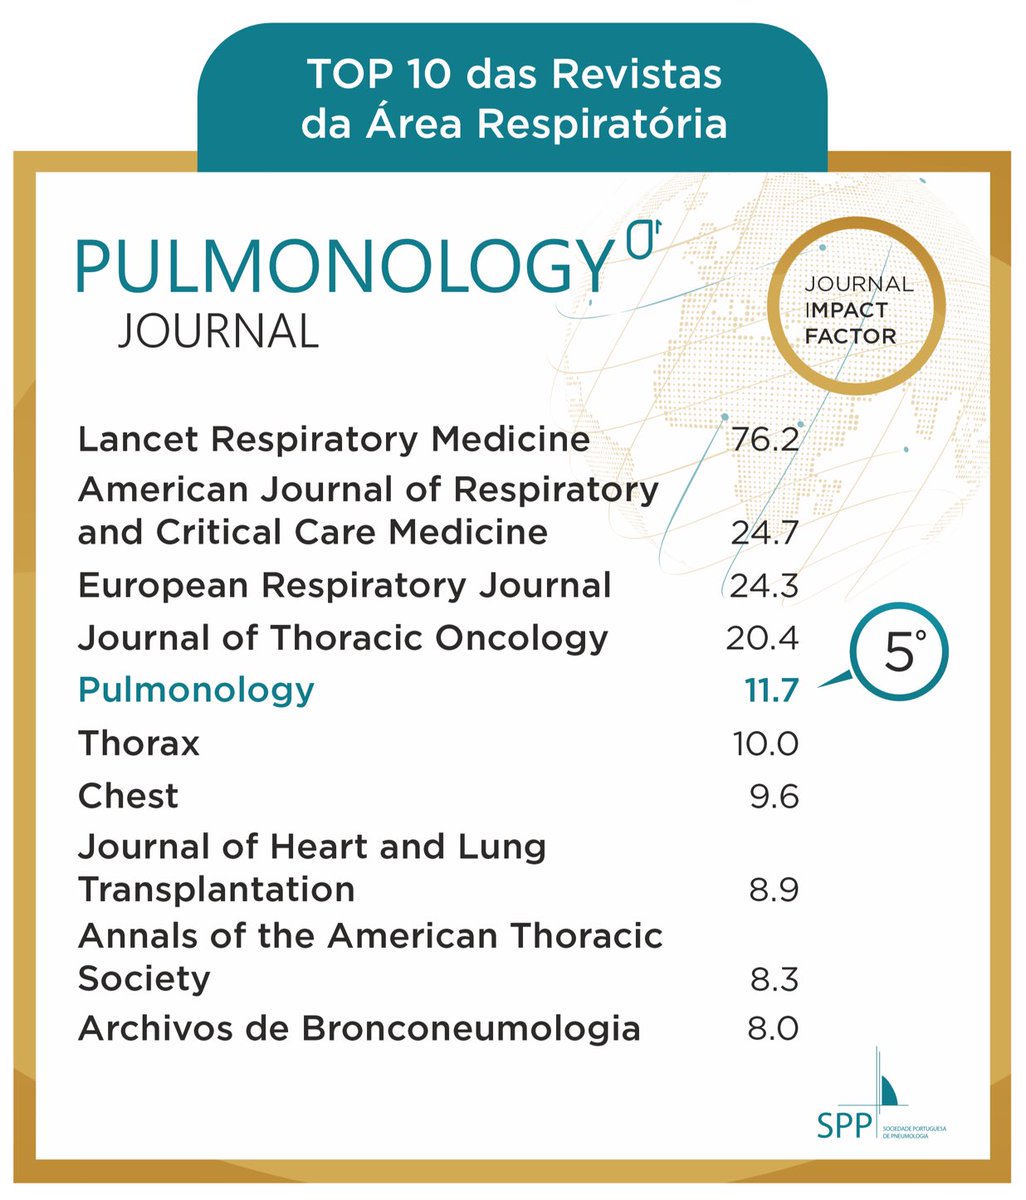 Starting as a regional journal from a tiny and peripheral country, Pulmonology has just become a pearl of the respiratory journals! Almost quadrupling the IF in 4 years! I am glad to have contributed to this great history being the Editor in Chief from 2010-13